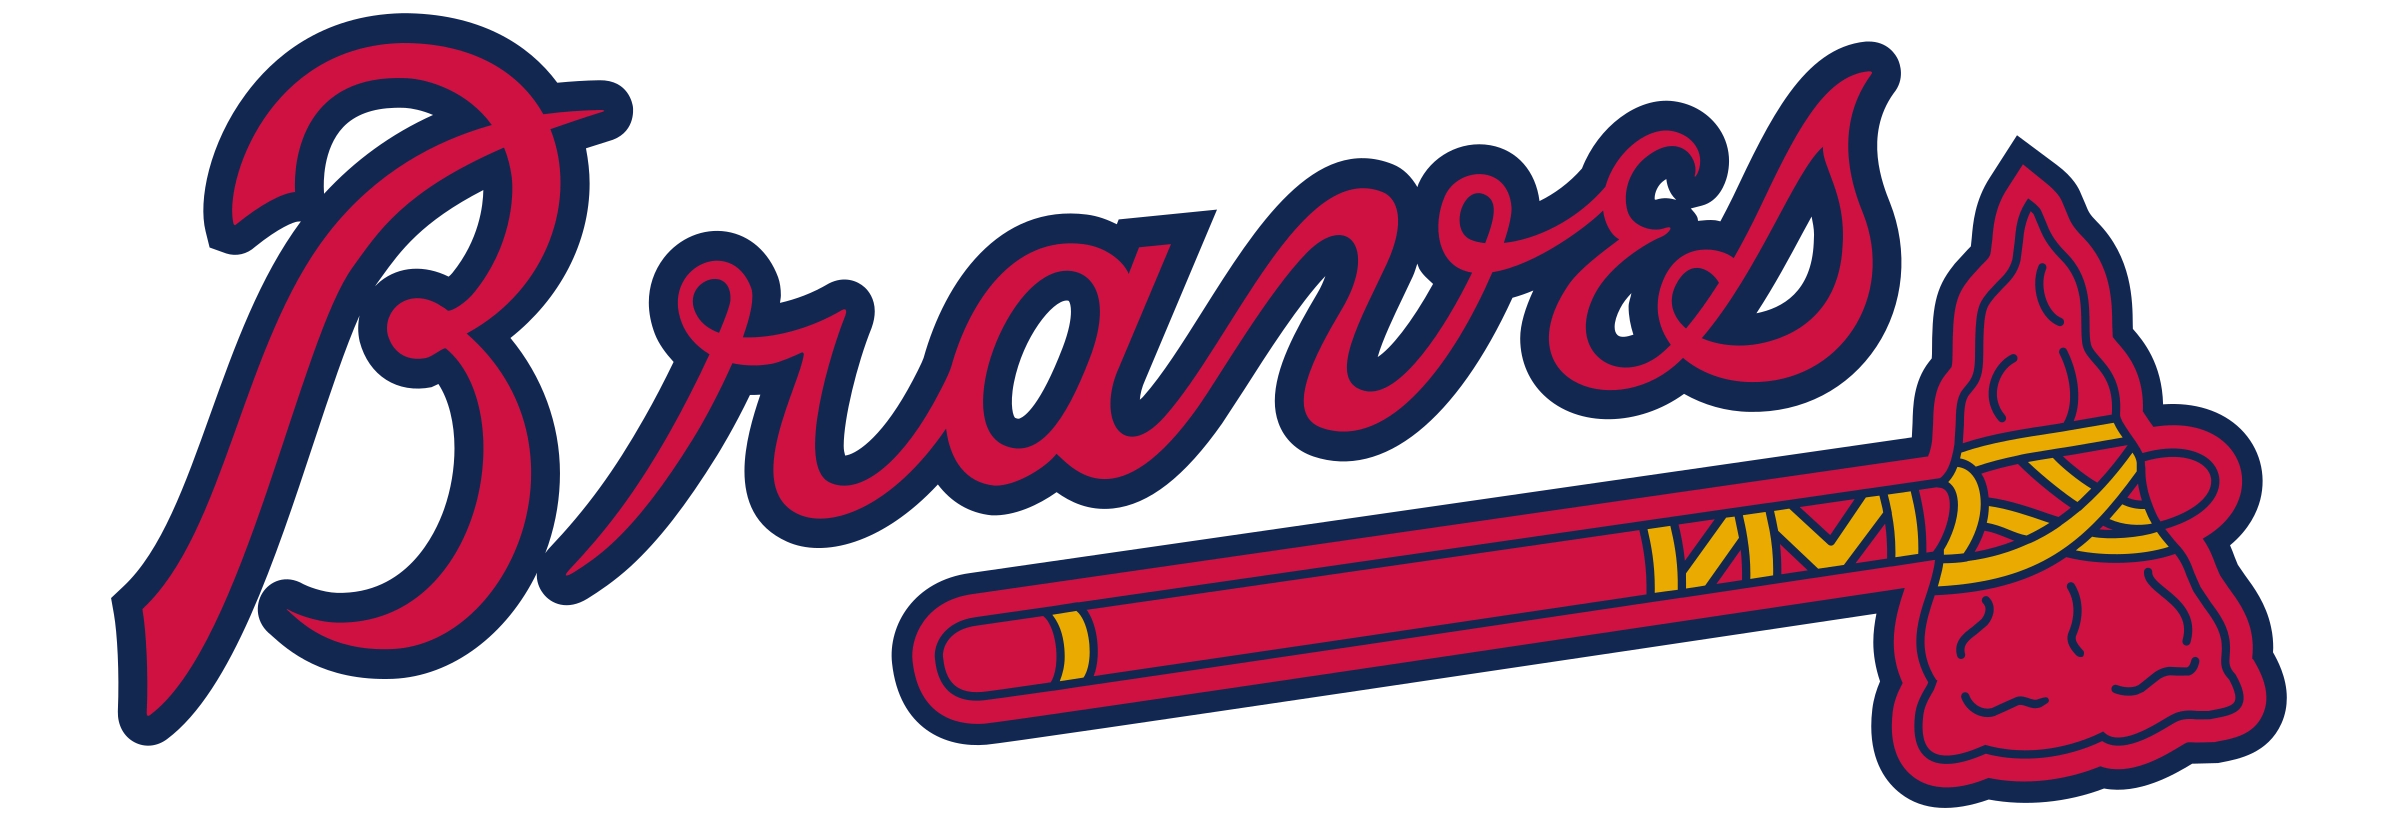 Free Braves Tickets Giveaway Brought To You By Sws Law Firm